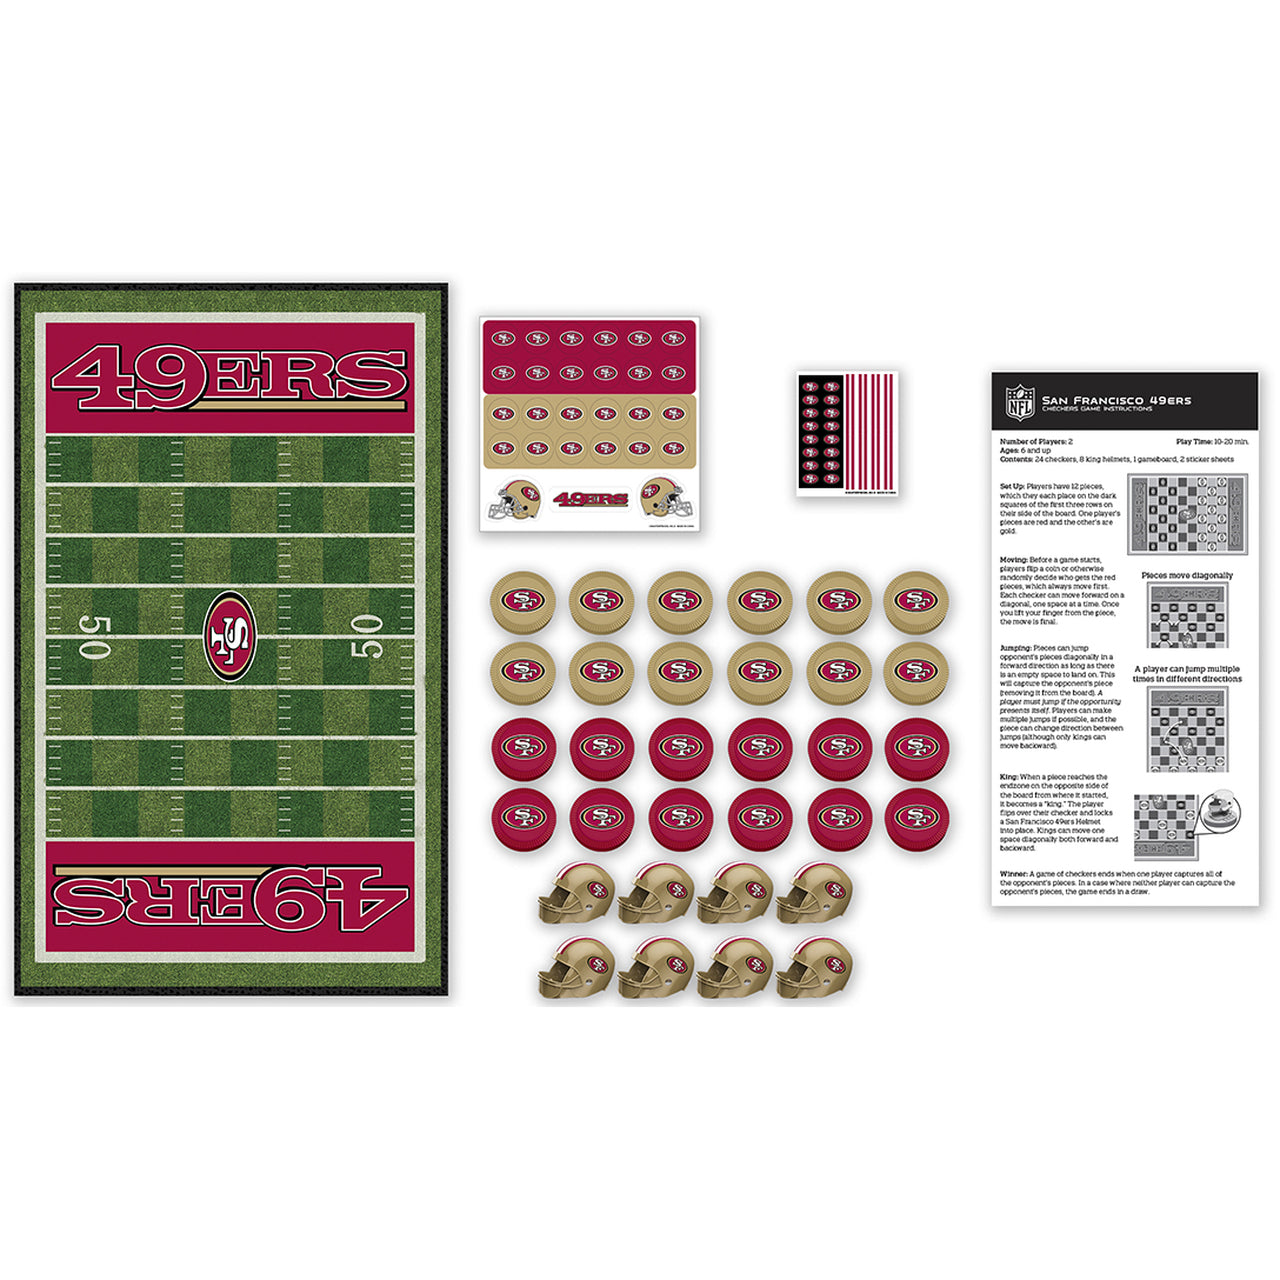 San Francisco 49ers Checkers Board Game by Masterpieces